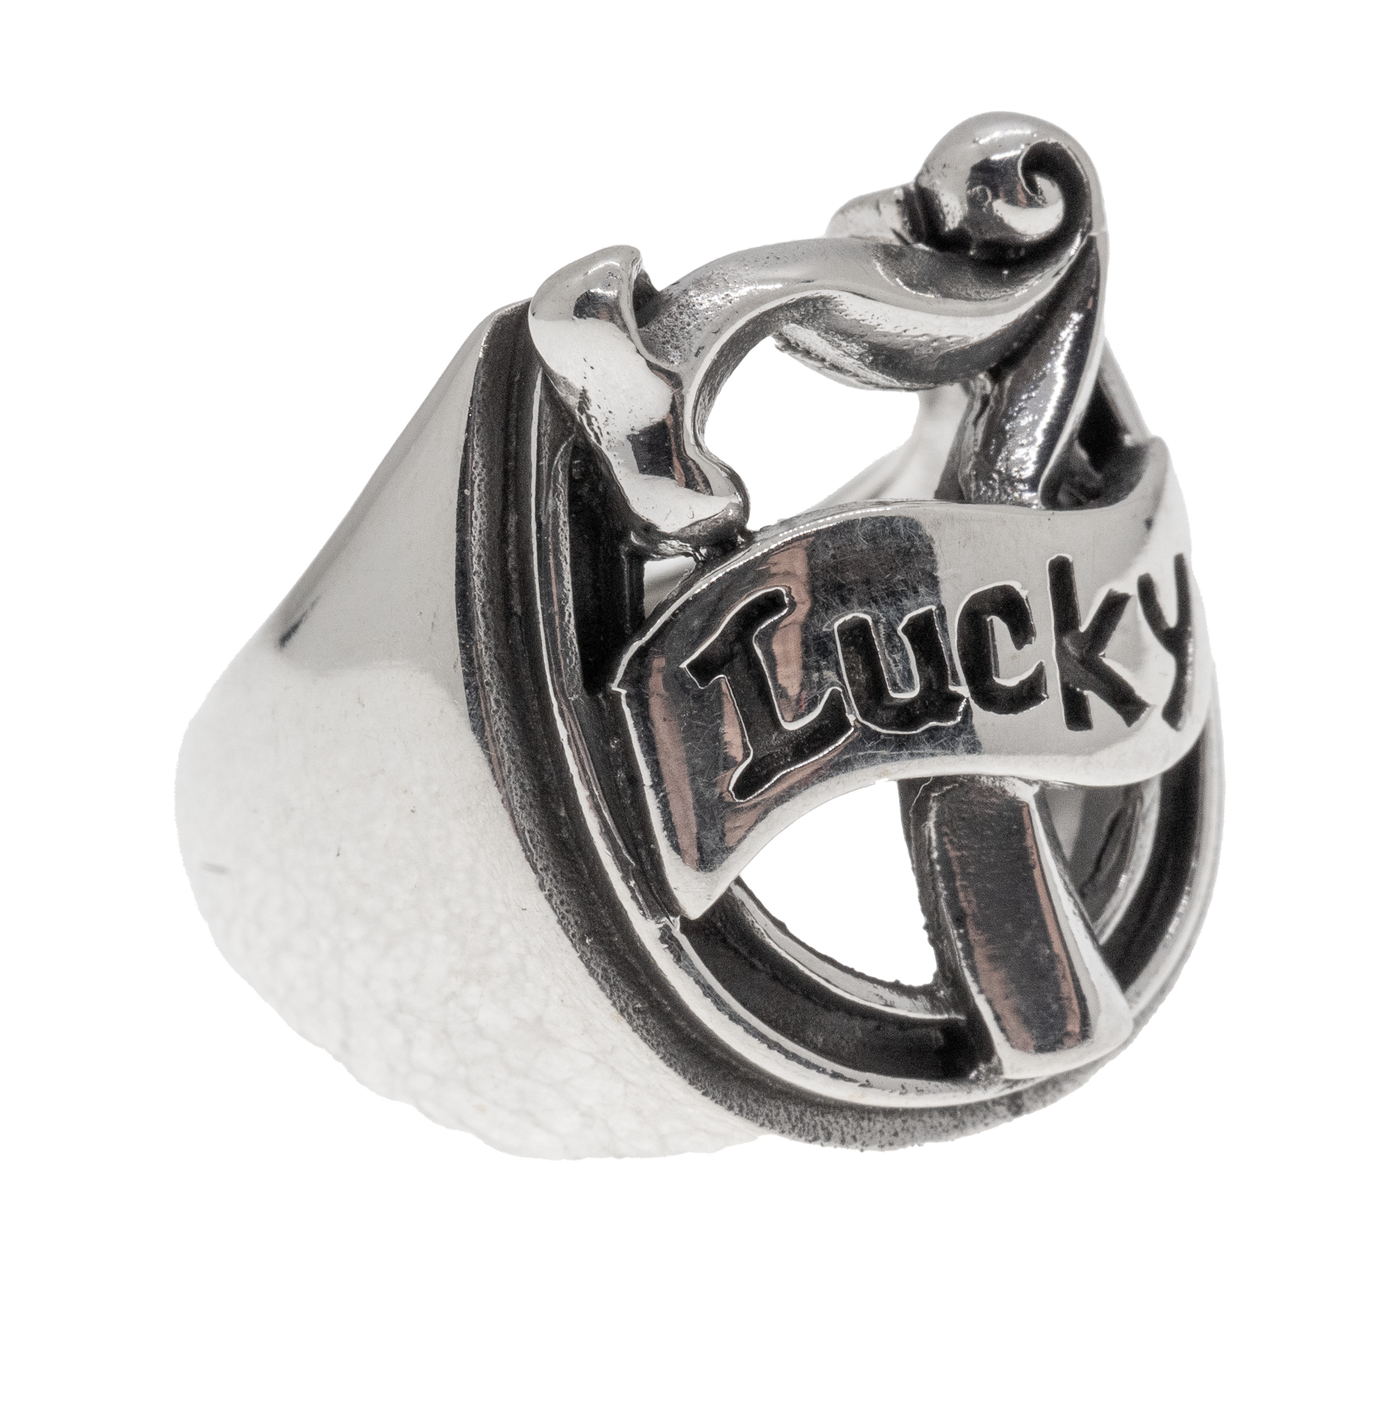 Lucky 7 Ring 925 sterling silver